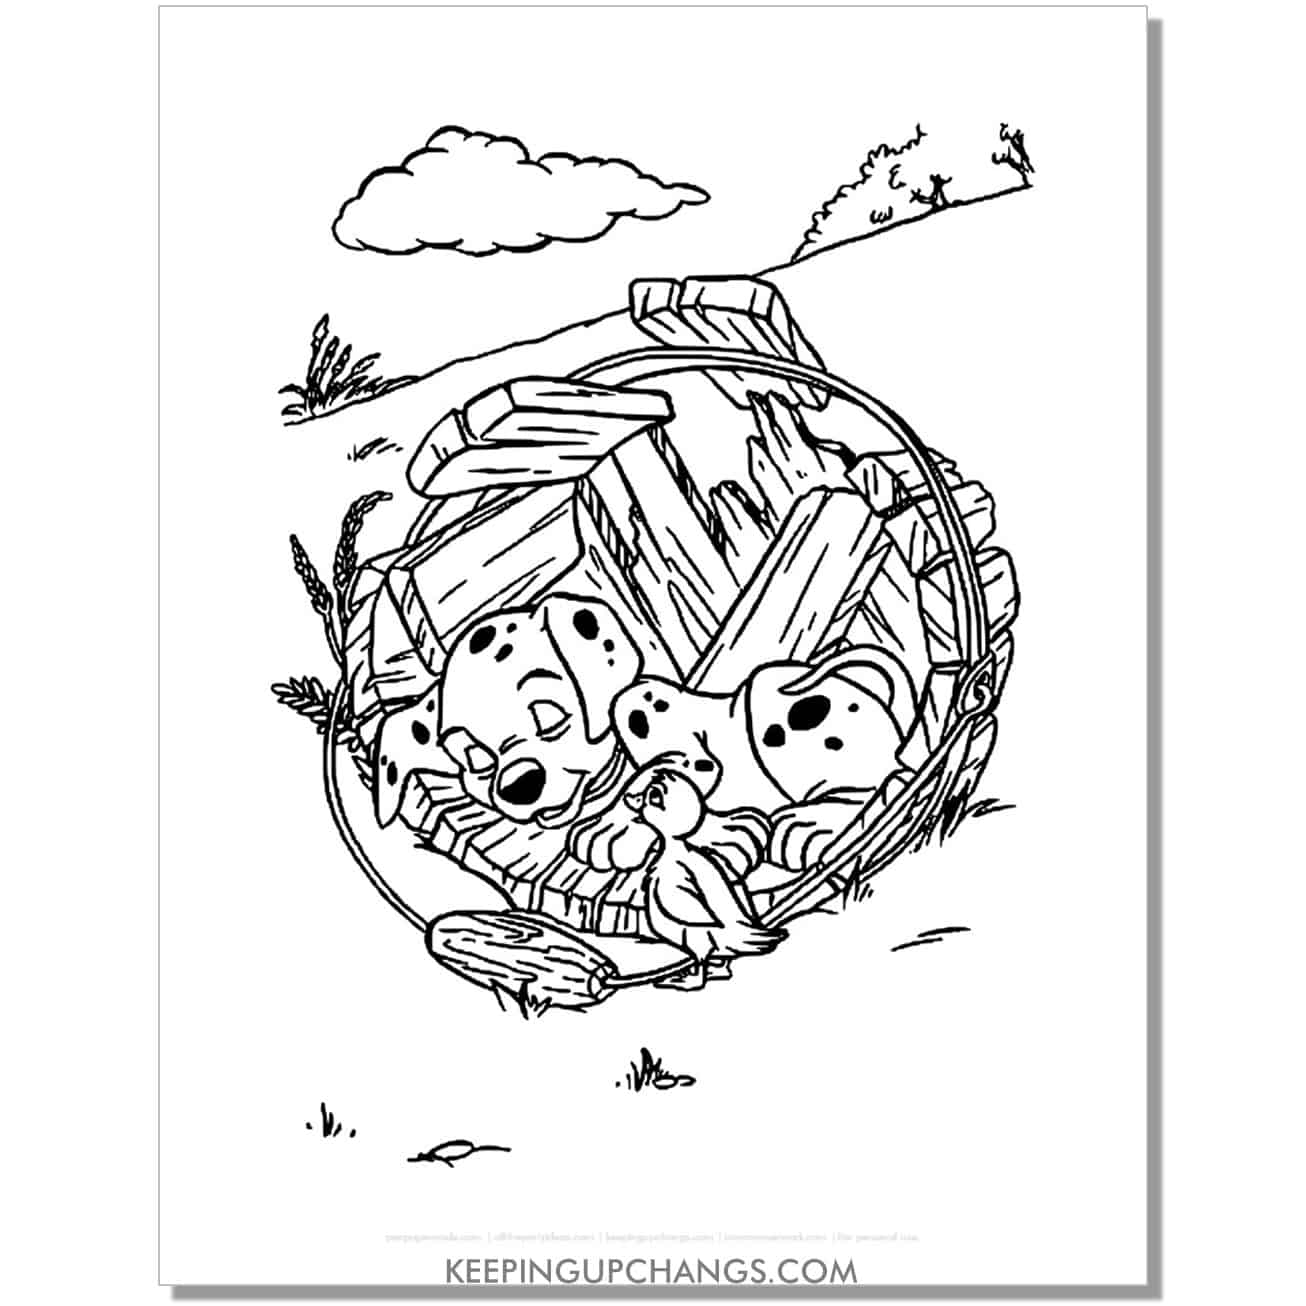 free rolly sleeping in broken barrel 101 dalmations coloring page, sheet.